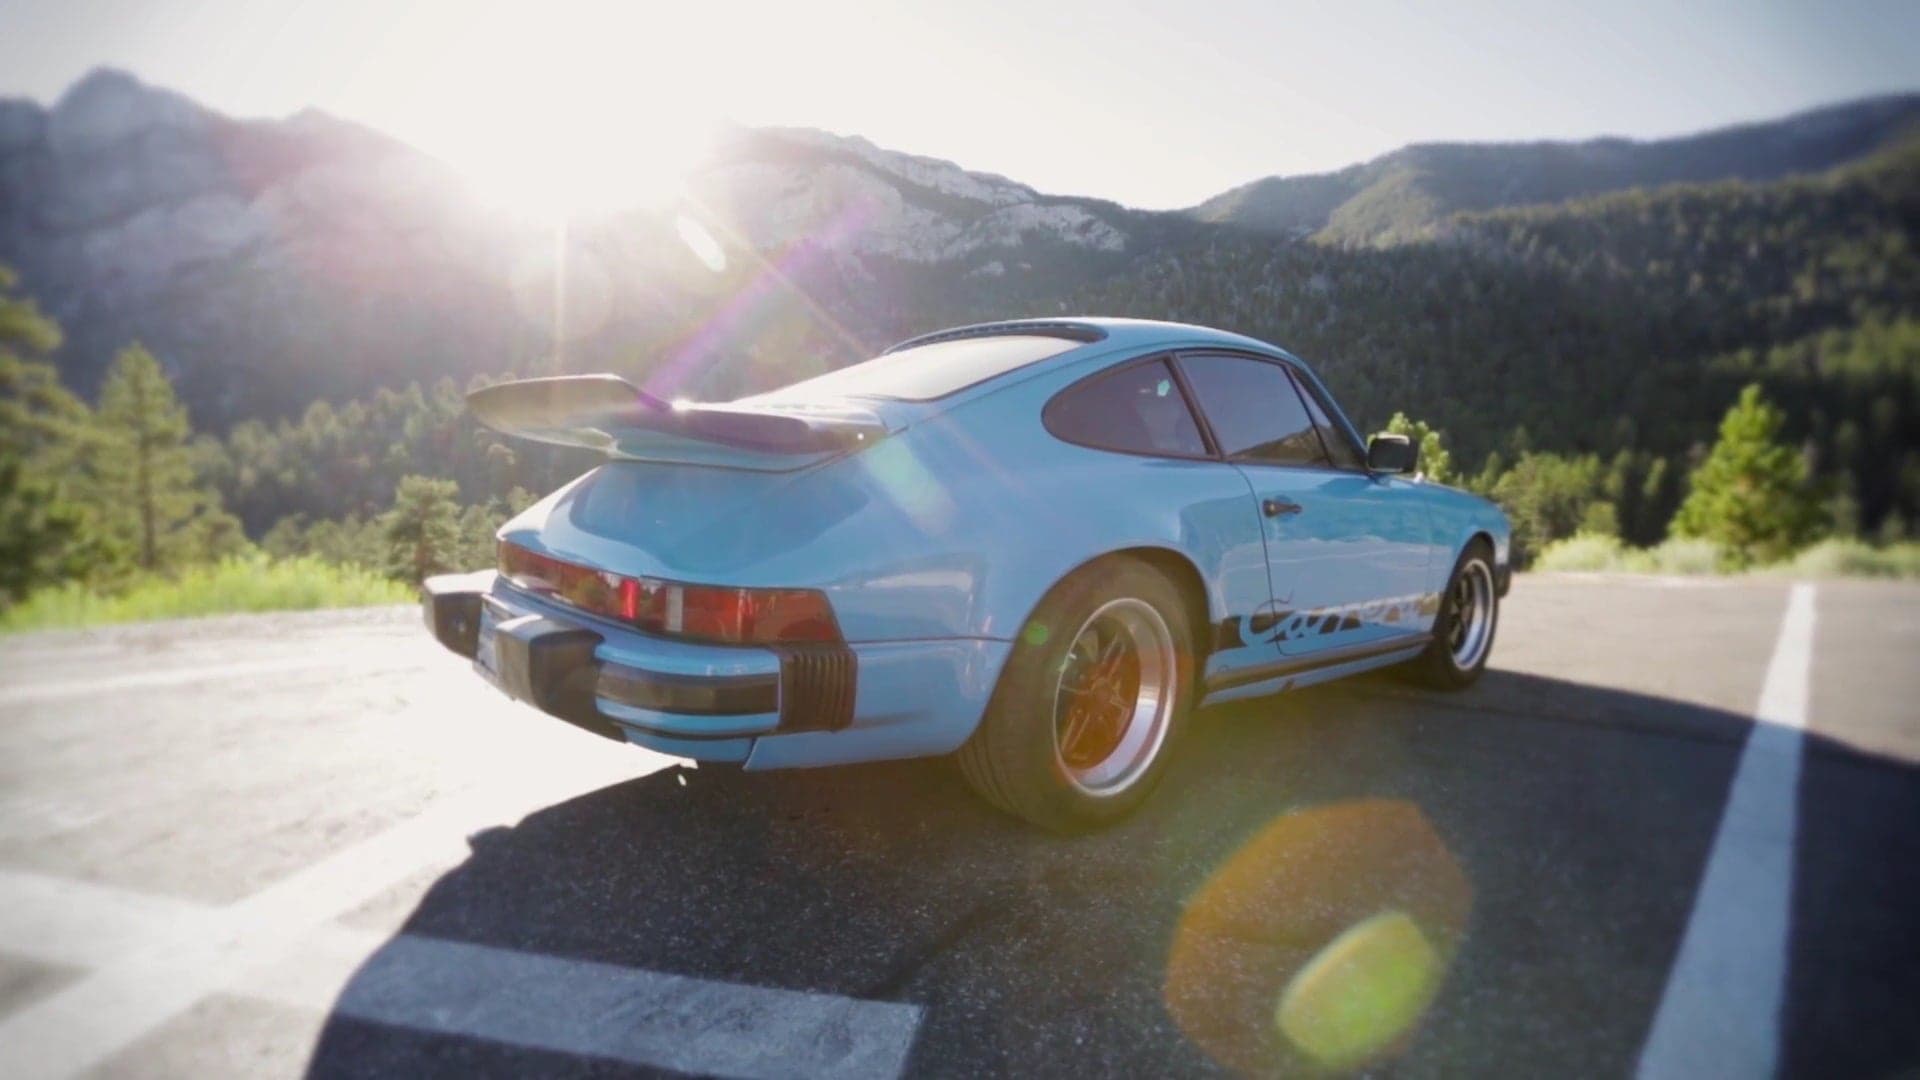 This Beautiful Mexico Blue Porsche Hides An Ugly Past